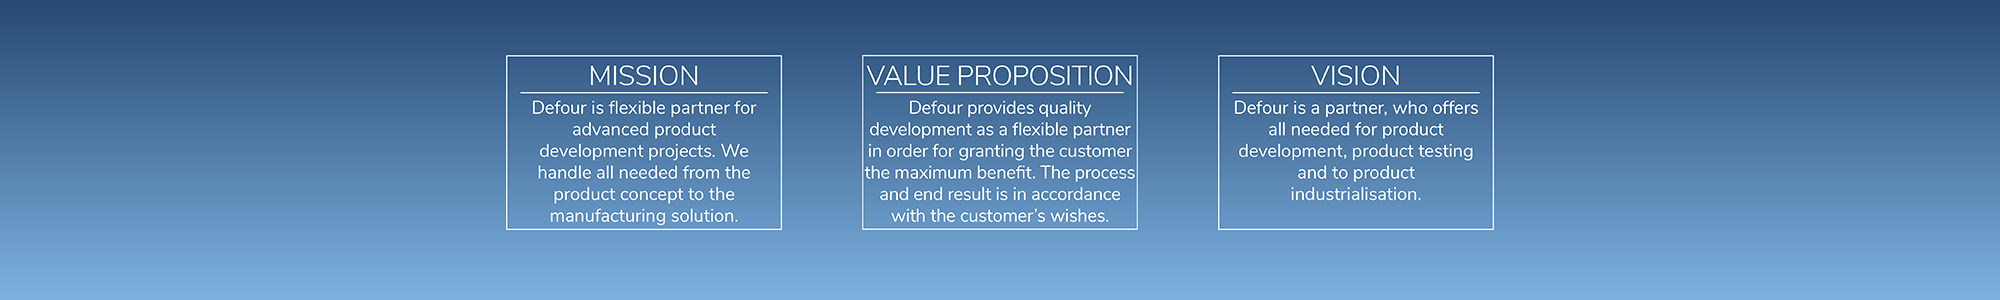 Defour is a flexible partner for advanced product development projects. We handle all needed from the product concept to the manufacturing solution. Our value proposition is to provide quality development as a flexible partner in order for granting the customer the maximum benefit. The process and end result are in accordance with the customer's wishes. Our vision is to be a partner, who offers all the needed for product development, product testing and to product industrialisation.